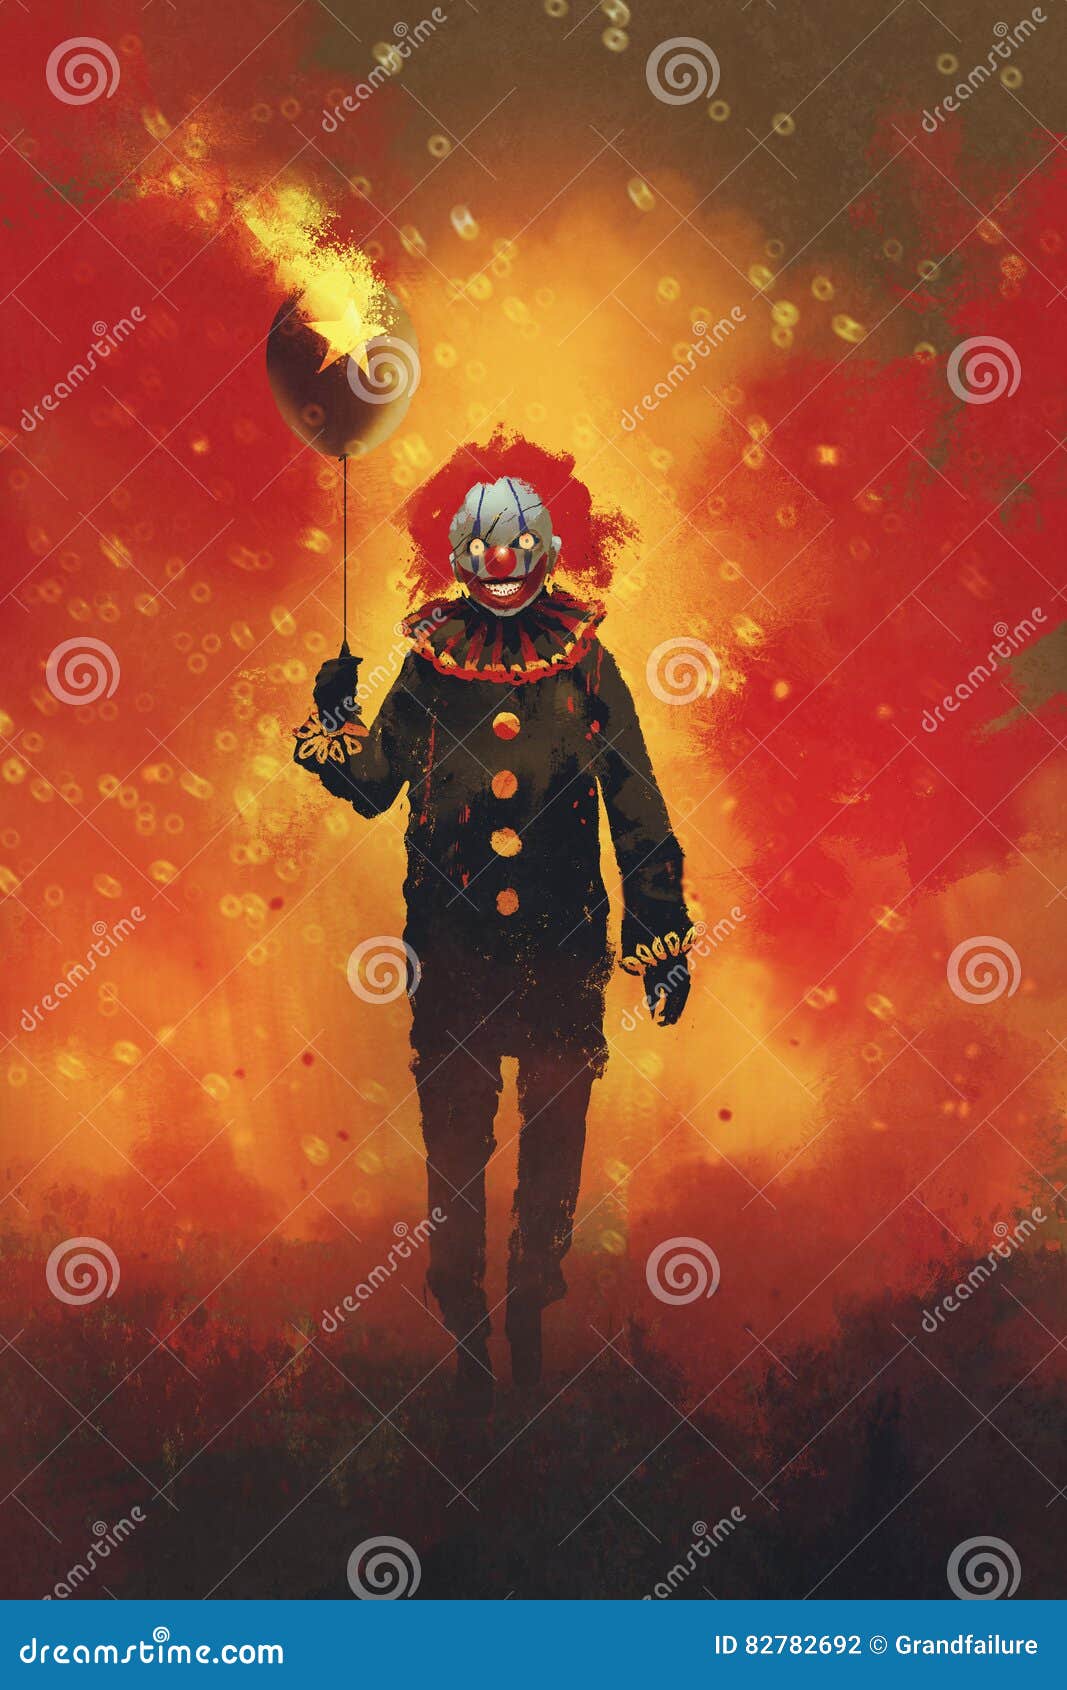 evil clown standing with a balloon on fire background